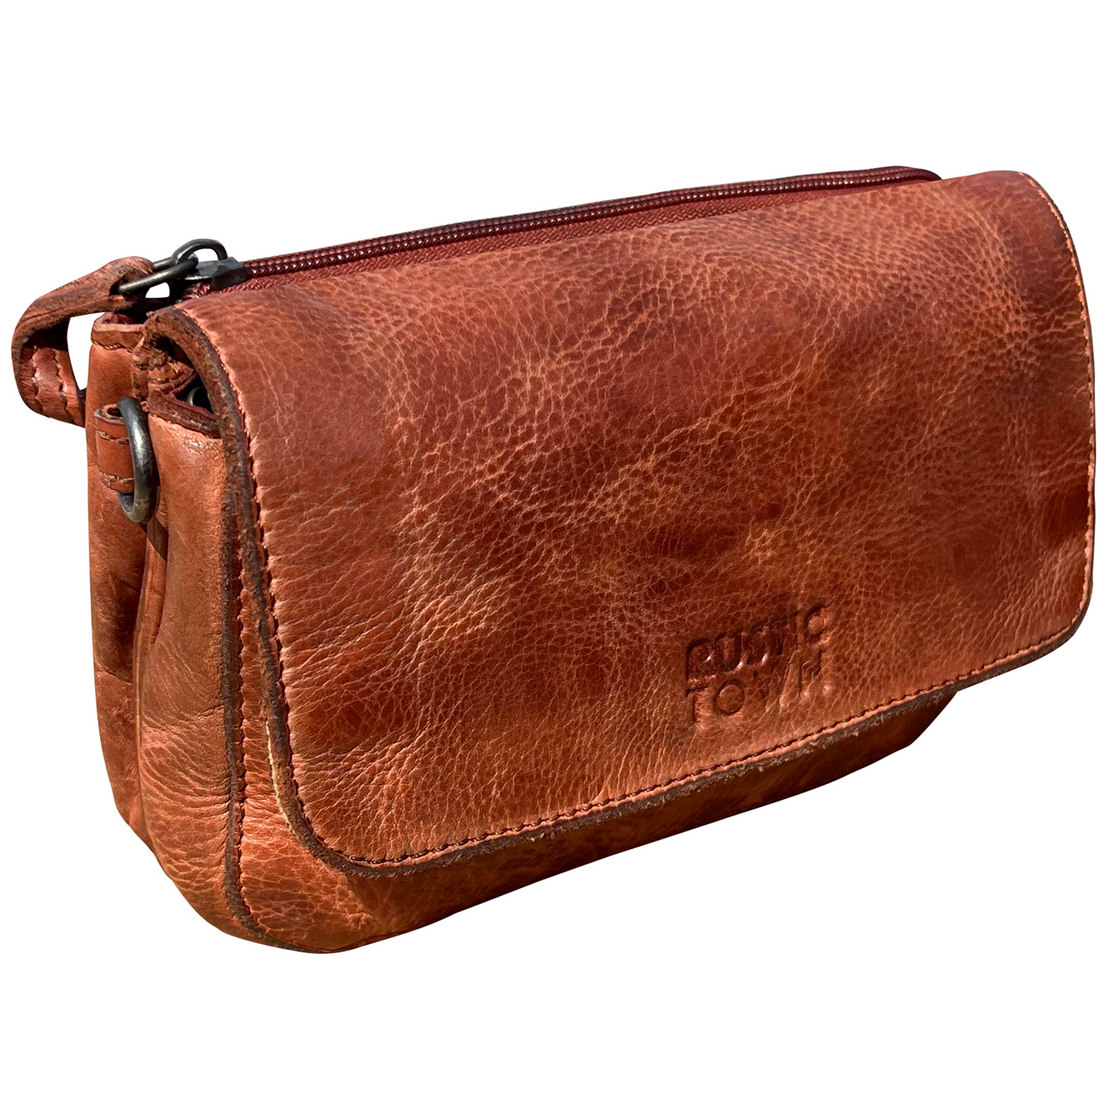 Leather Wallet Travel Purse Waist Bag for Women, Brown